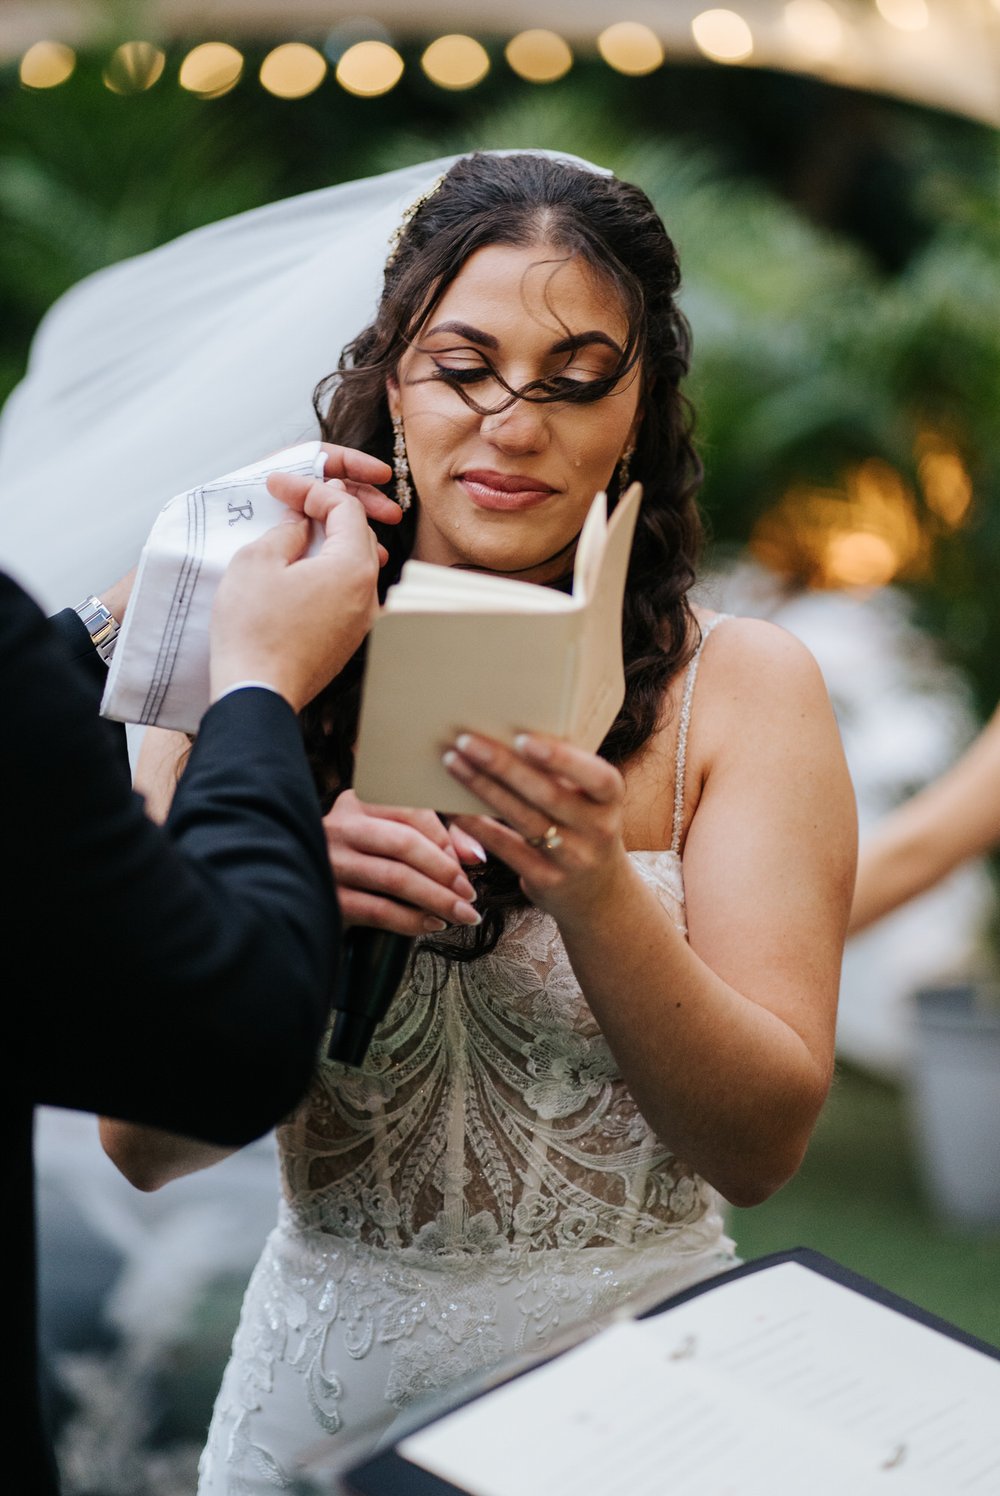 Bride has wind blow hair in her face as groom reaches in with his handkerchief to wipe the tears that are streaming down her face during wedding ceremony at Villa Woodbine in Miami